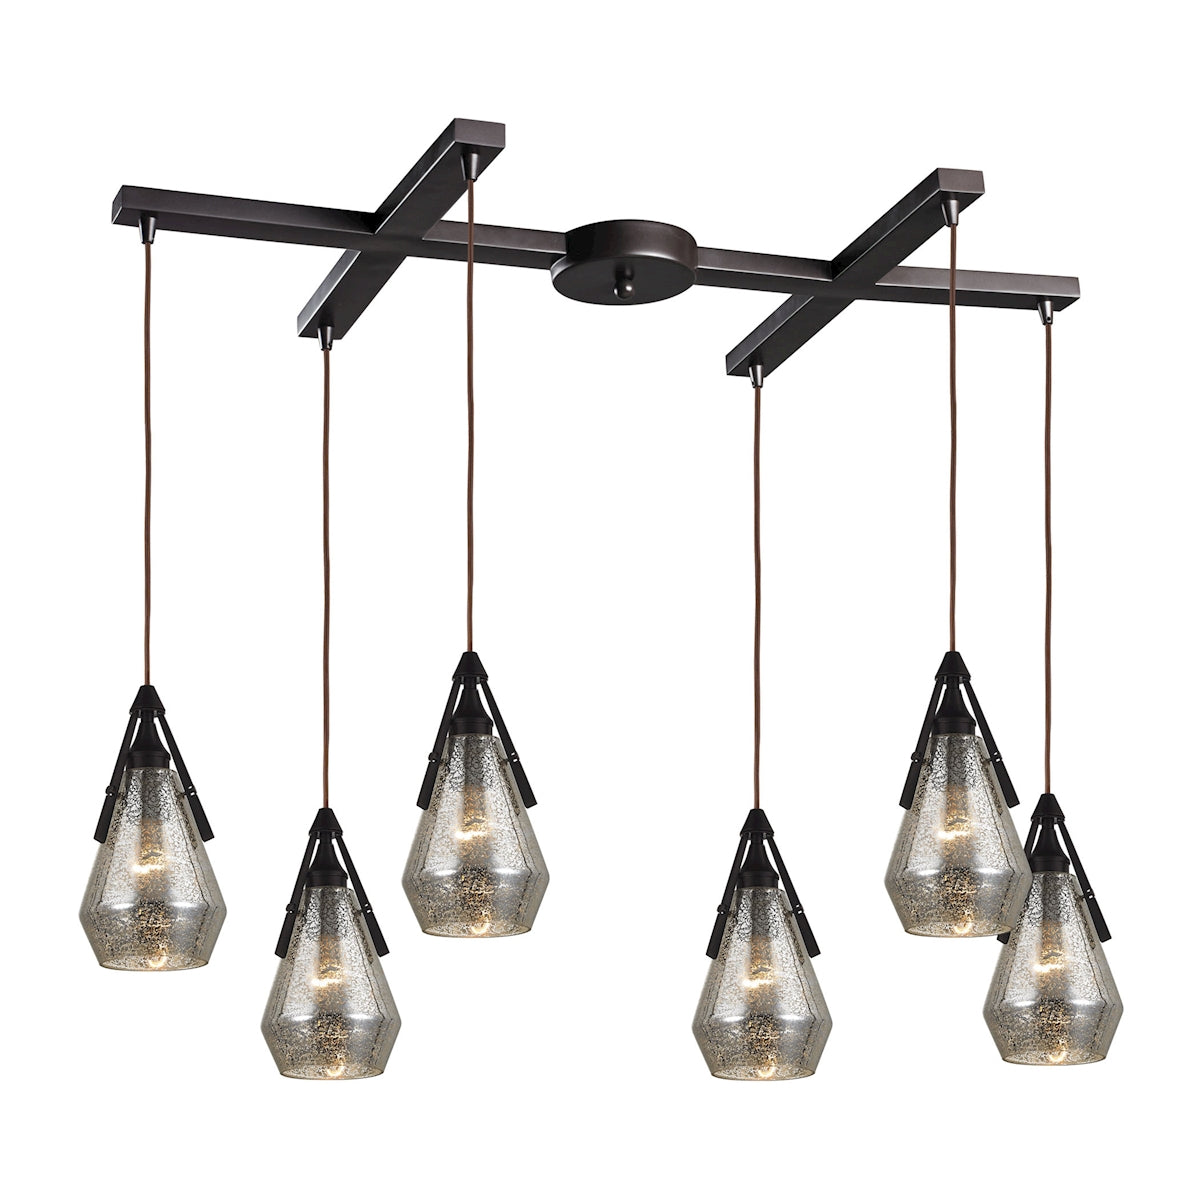 ELK Lighting 46172/6 Duncan 6-Light H-Bar Pendant Fixture in Oil Rubbed Bronze with Smoked Crackle Glass